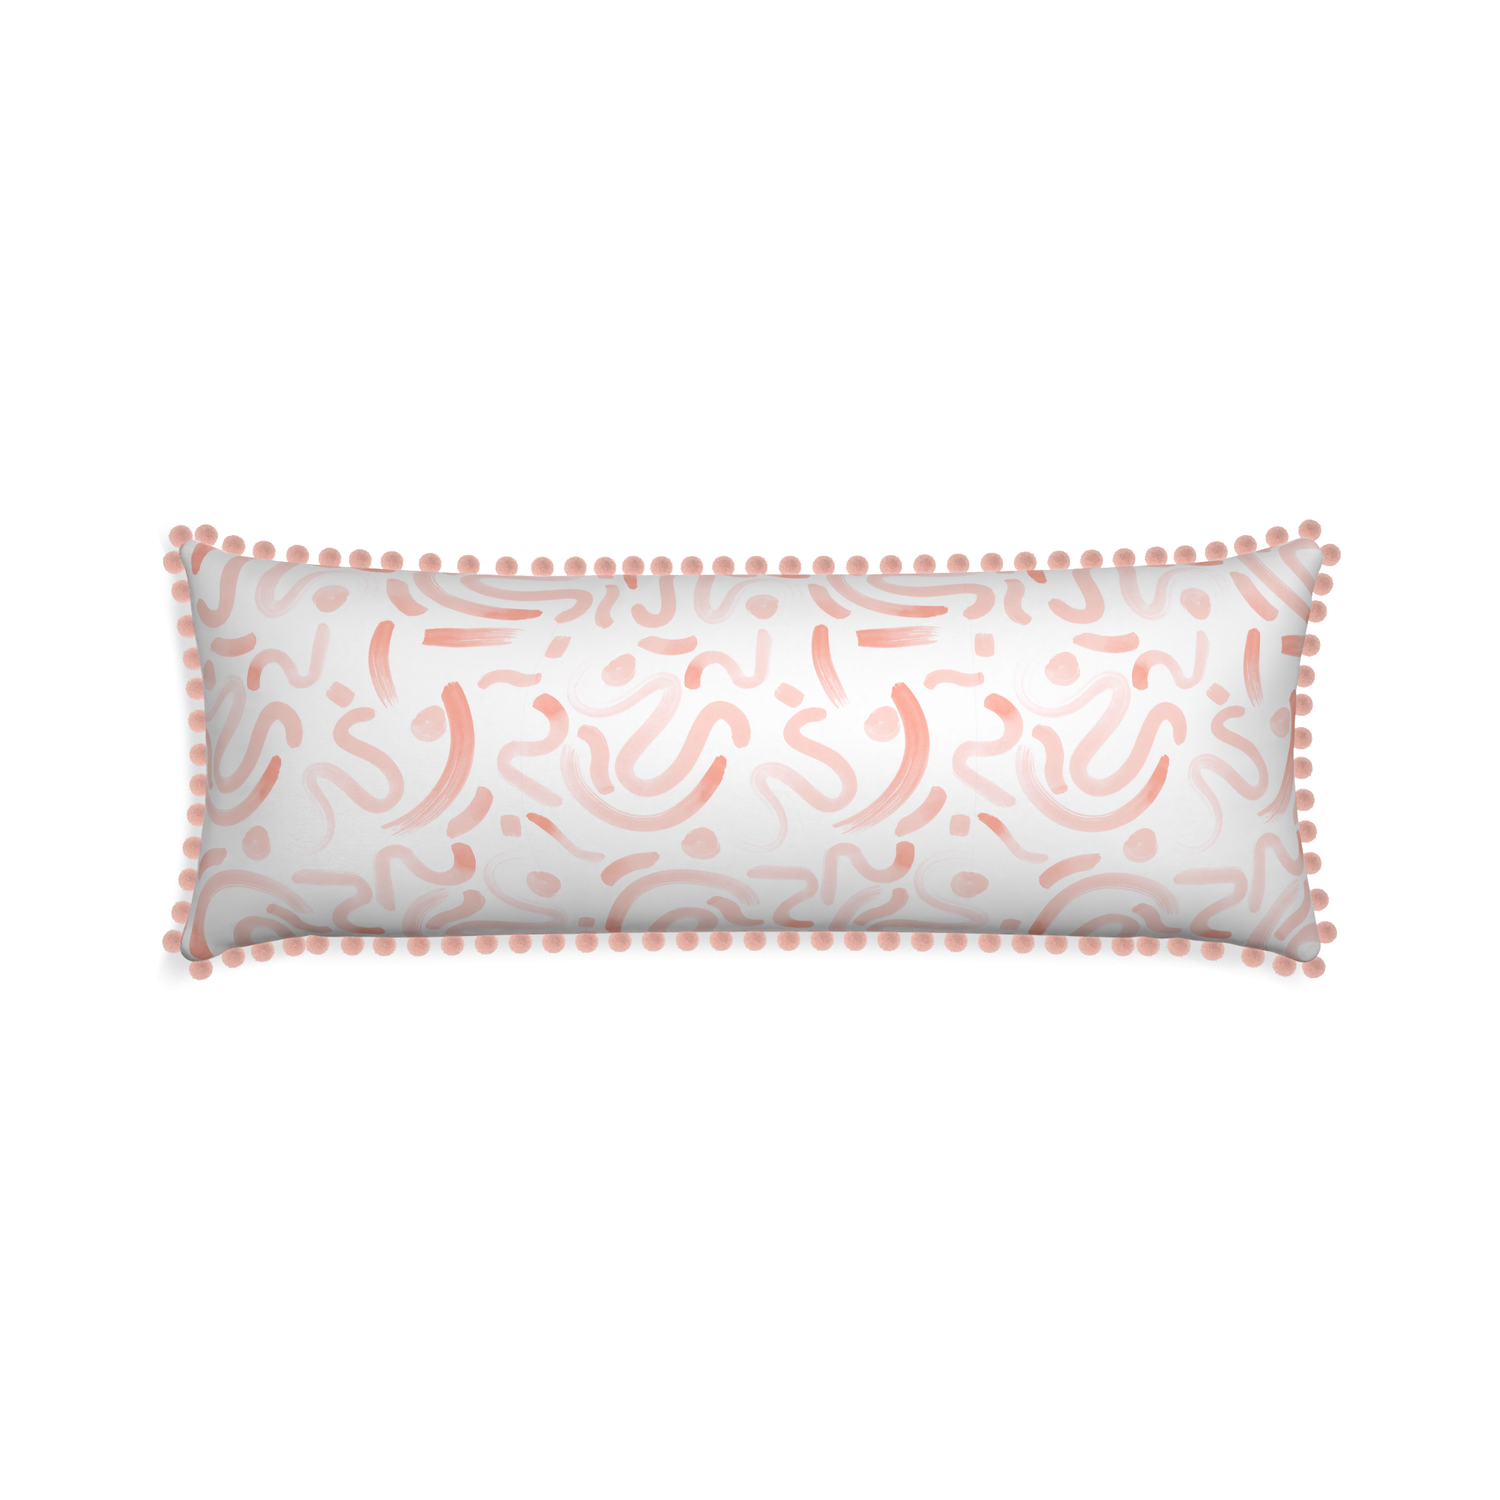 Xl-lumbar hockney pink custom pink graphicpillow with rose pom pom on white background